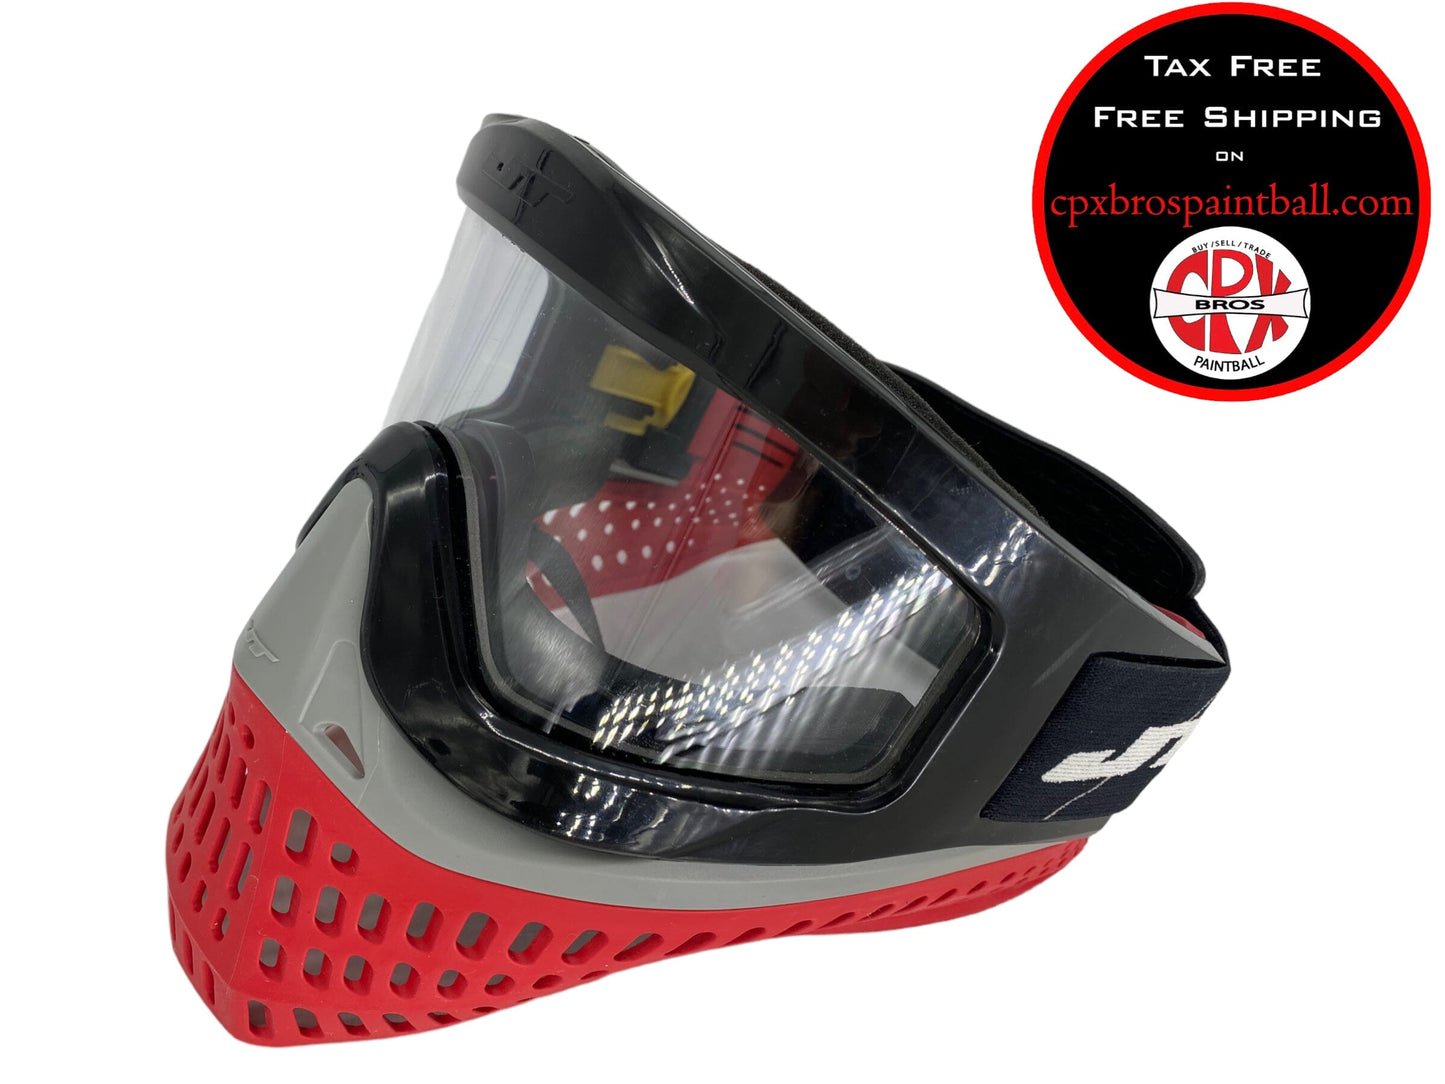 Used JT Pro-flex X Paintball Goggle Mask Paintball Gun from CPXBrosPaintball Buy/Sell/Trade Paintball Markers, Paintball Hoppers, Paintball Masks, and Hormesis Headbands